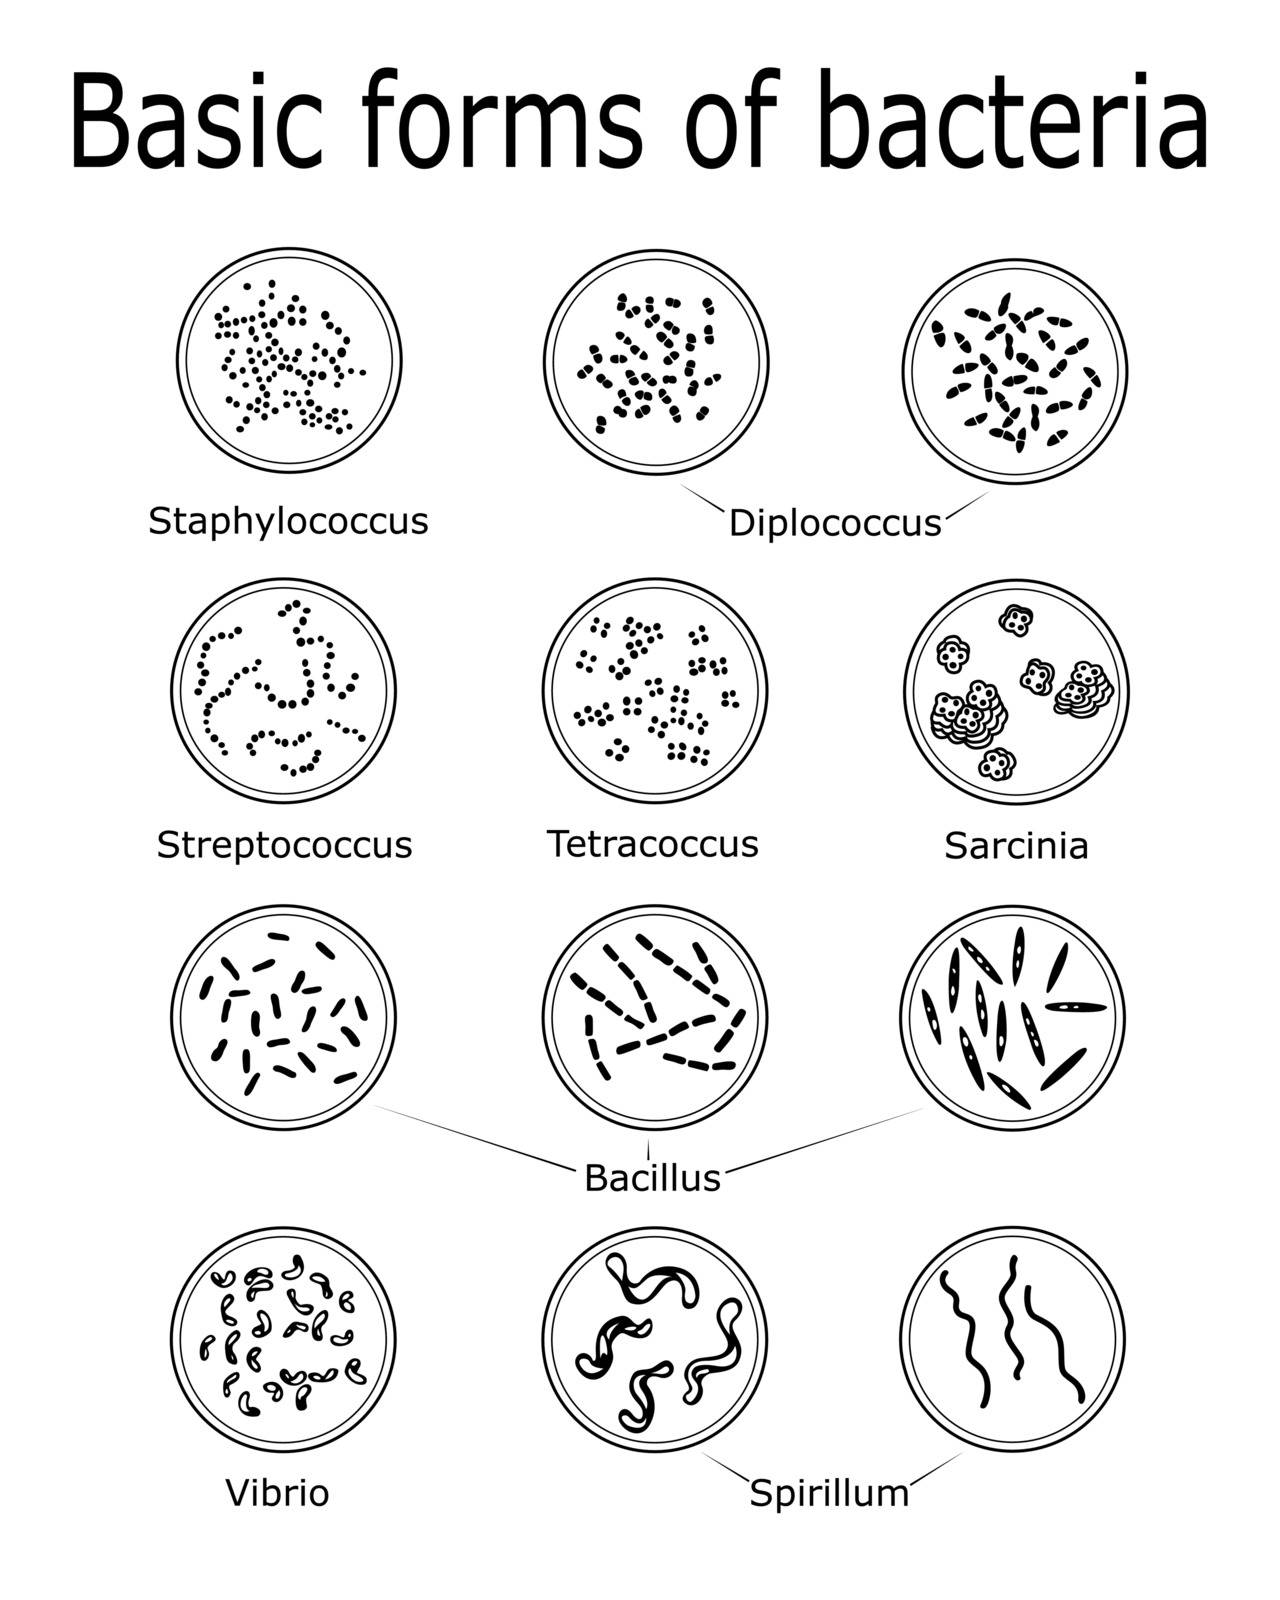 The basic forms of bacteria by Scio21